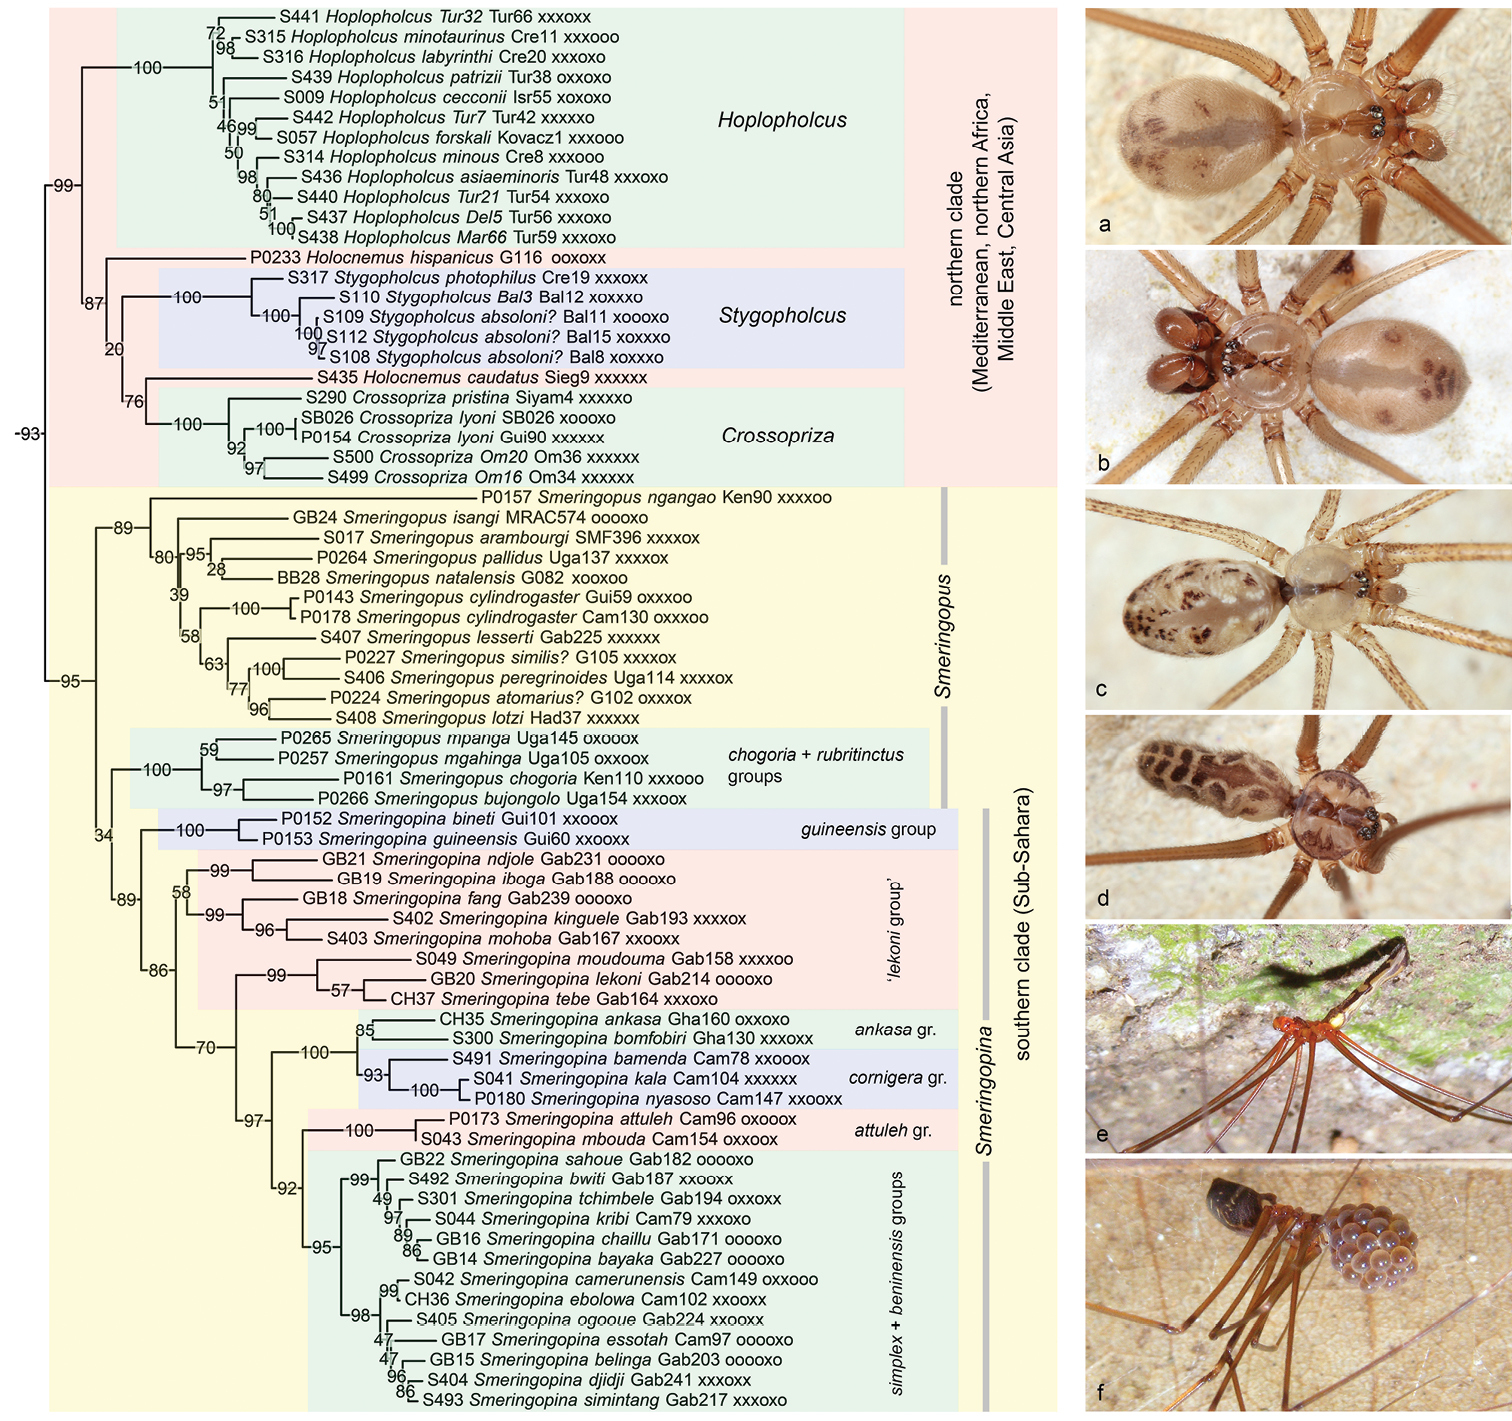 The Phylogeny Of Pholcid Spiders A Critical Evaluation Of Relationships Suggested By Molecular Data Araneae Pholcidae